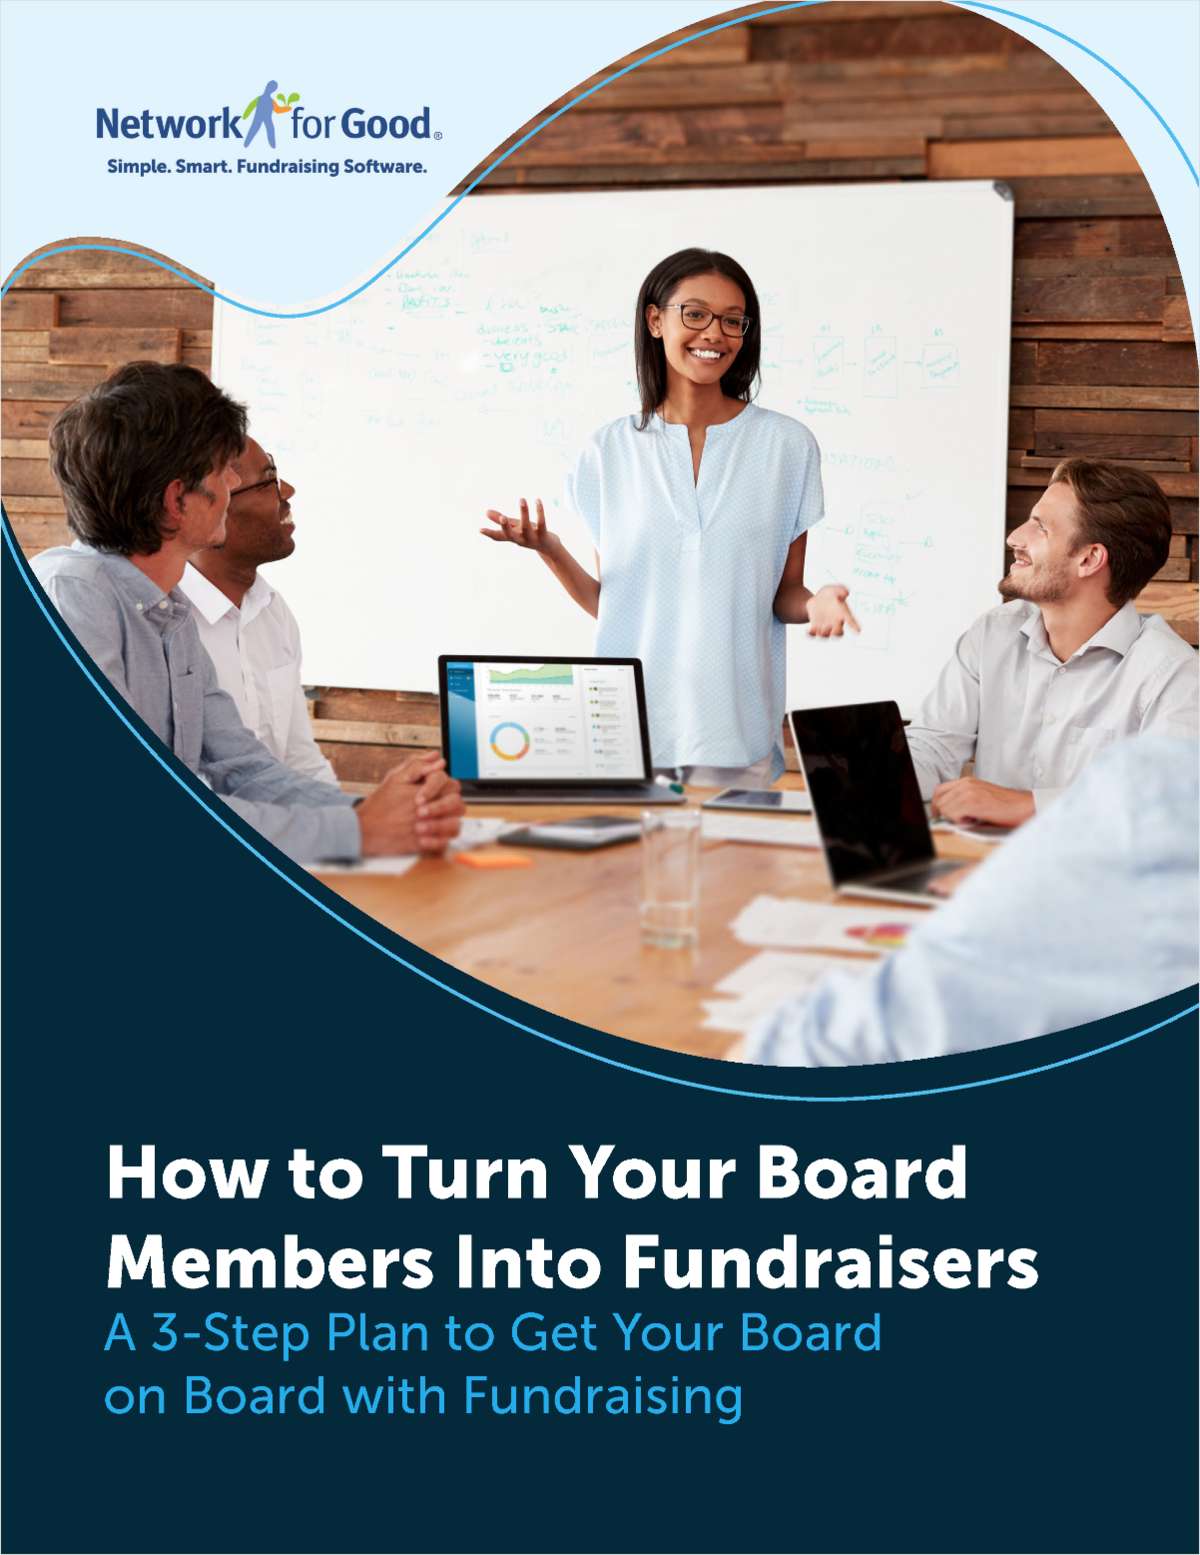 Turning Your Board Members Into Fundraisers